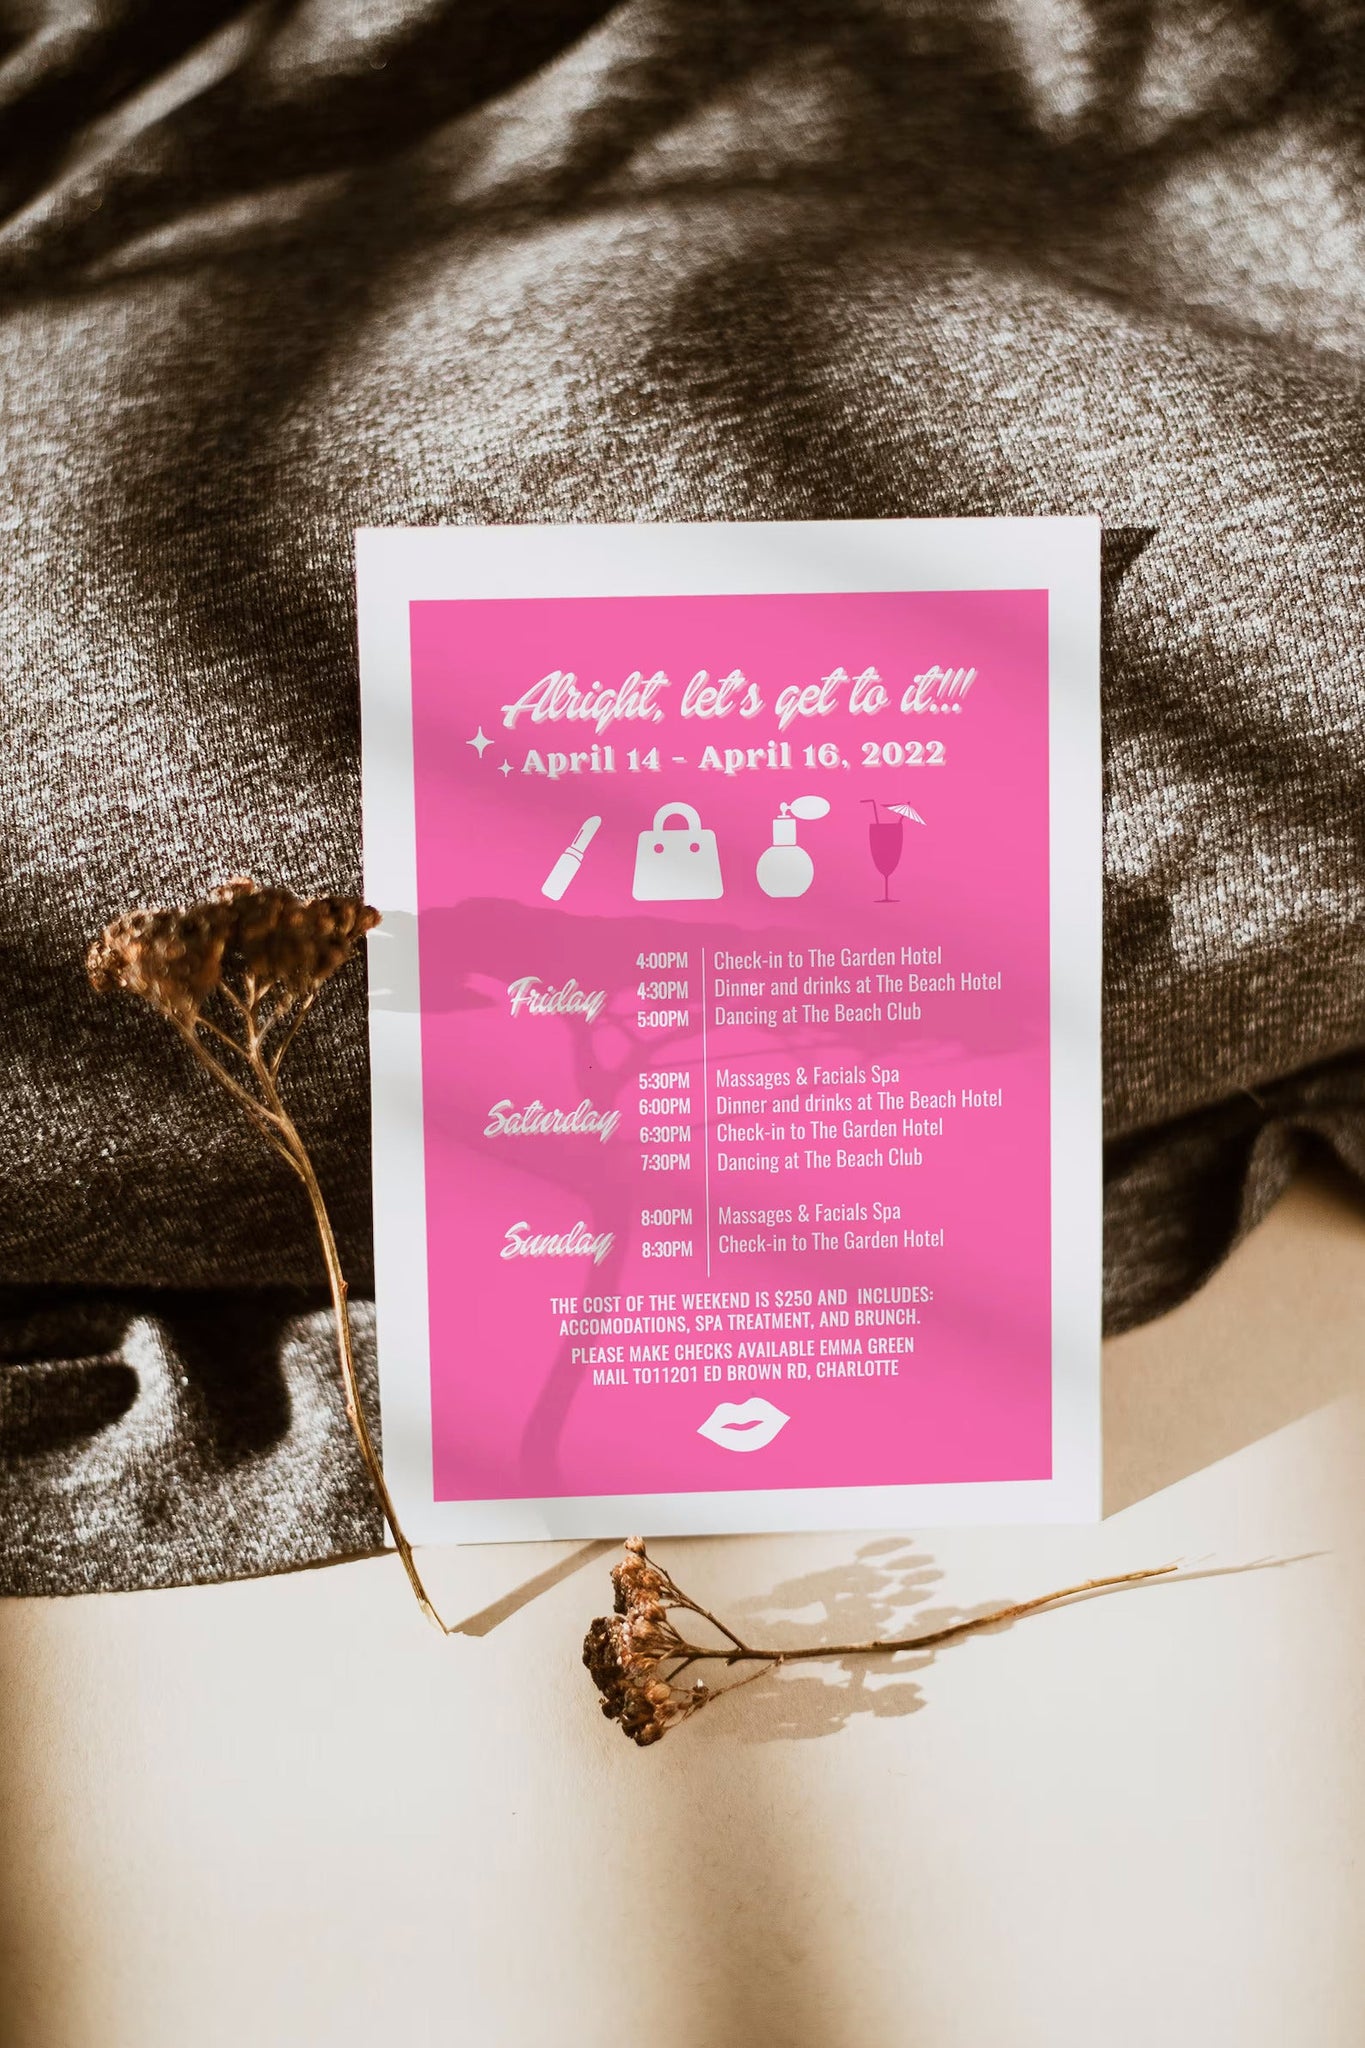 Barbie Bachelorette Party Invitation & Itinerary, Malibu Bachelorette Party, Hot Pink Bachelorette Invite, Instant Download, Editable, DIY